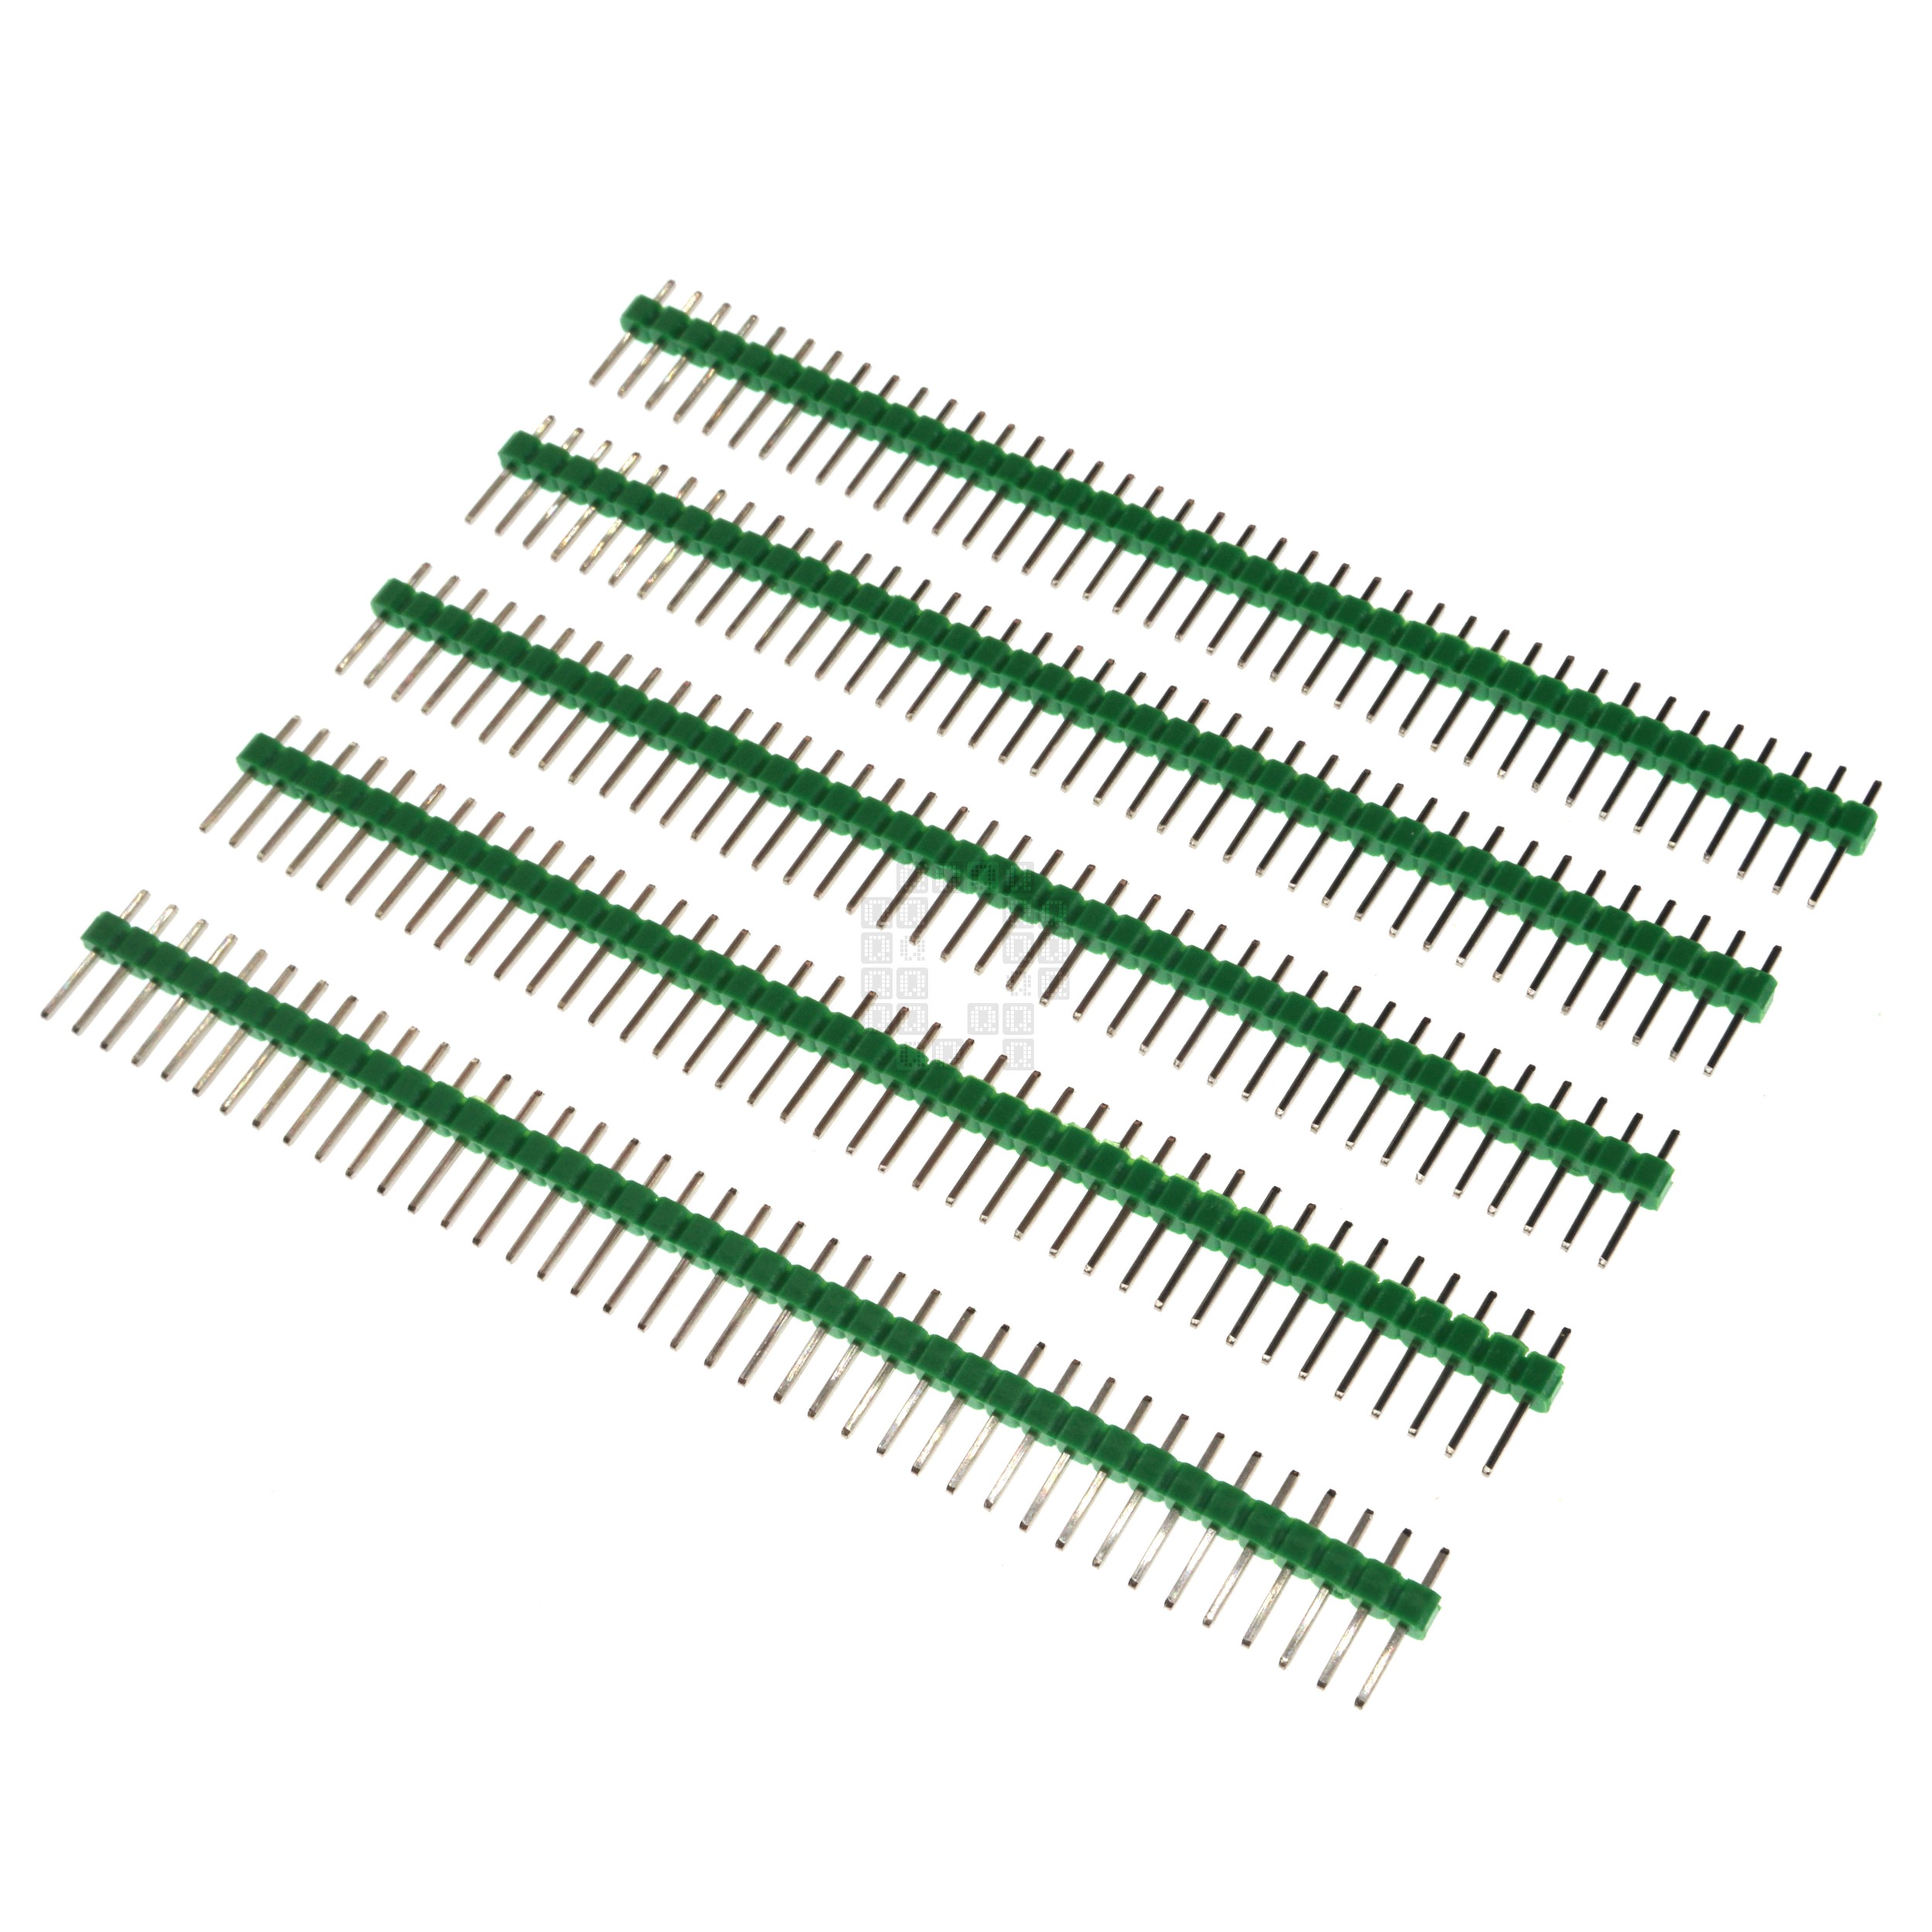 1x40 Pin Male Breakable Single Row Pin Header, 2.54mm Pitch, 11.2mm Height, 5-Pack, Green